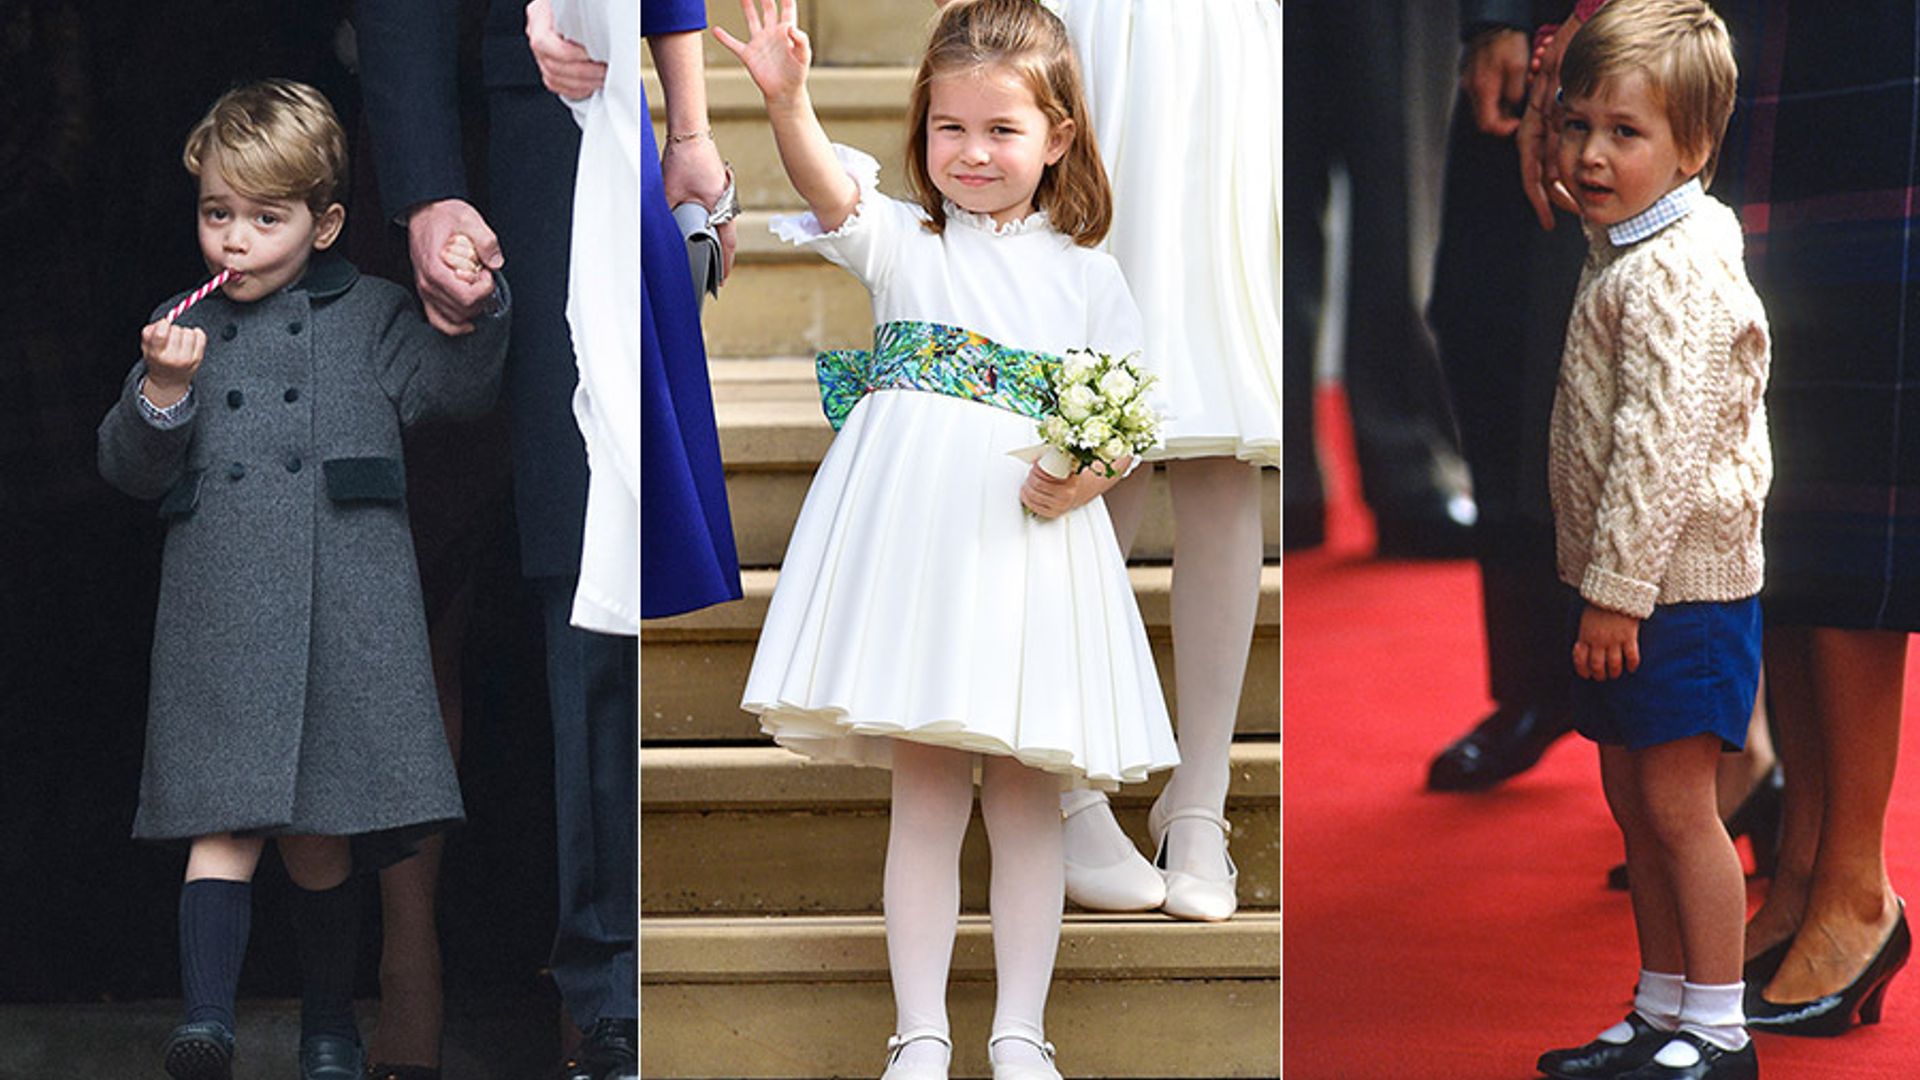 Adorable little royals back when they were just three years old, from the Queen to Prince William